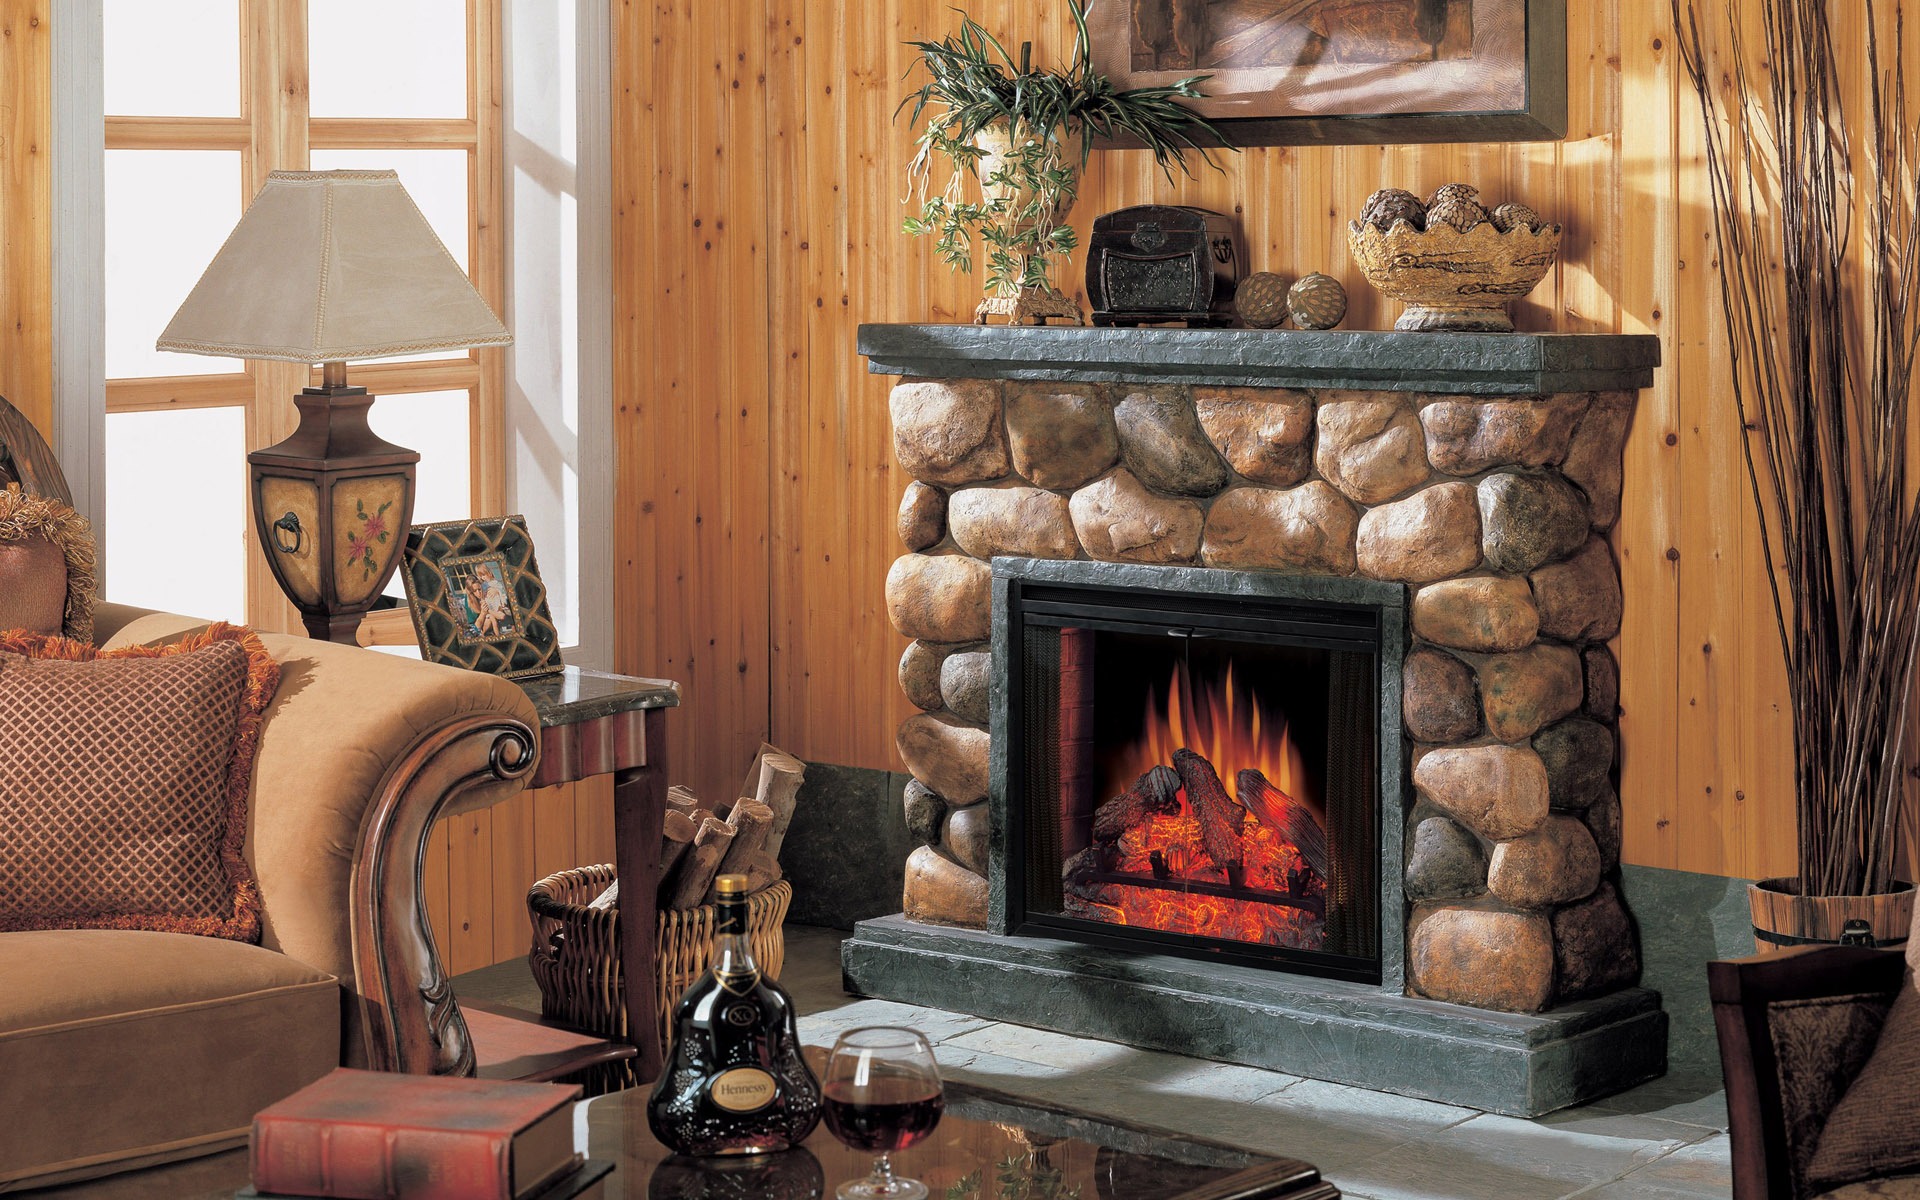 Western-style family fireplace wallpaper (1) #2 - 1920x1200